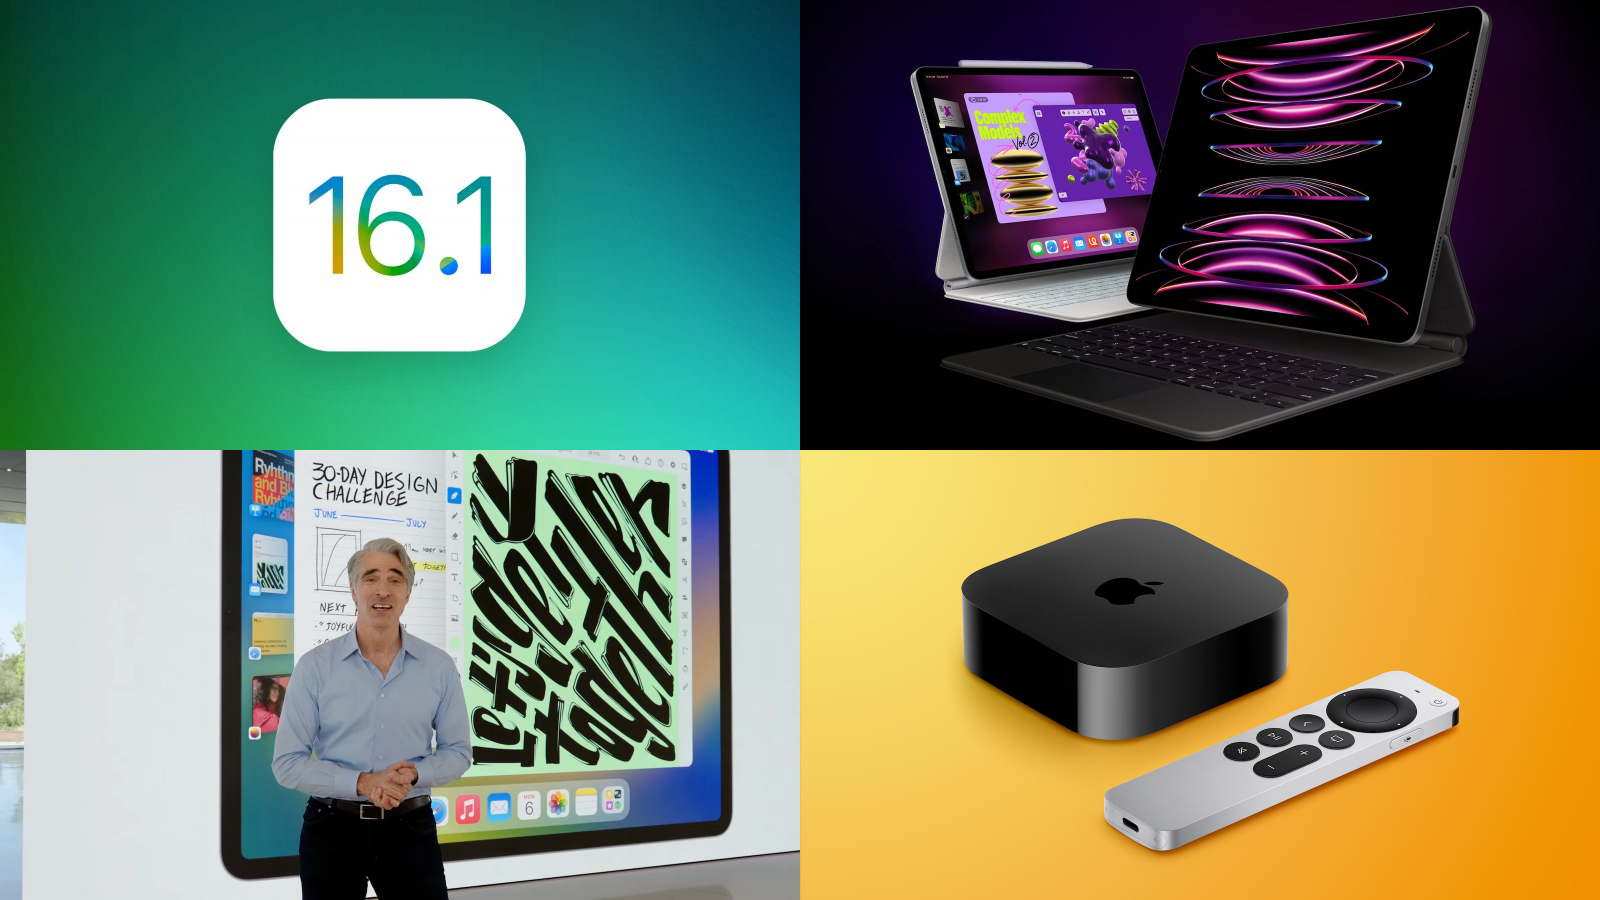 Mark Your Calendar: iOS 16.1 Release, New iPad Pro Launch, and More Coming Up